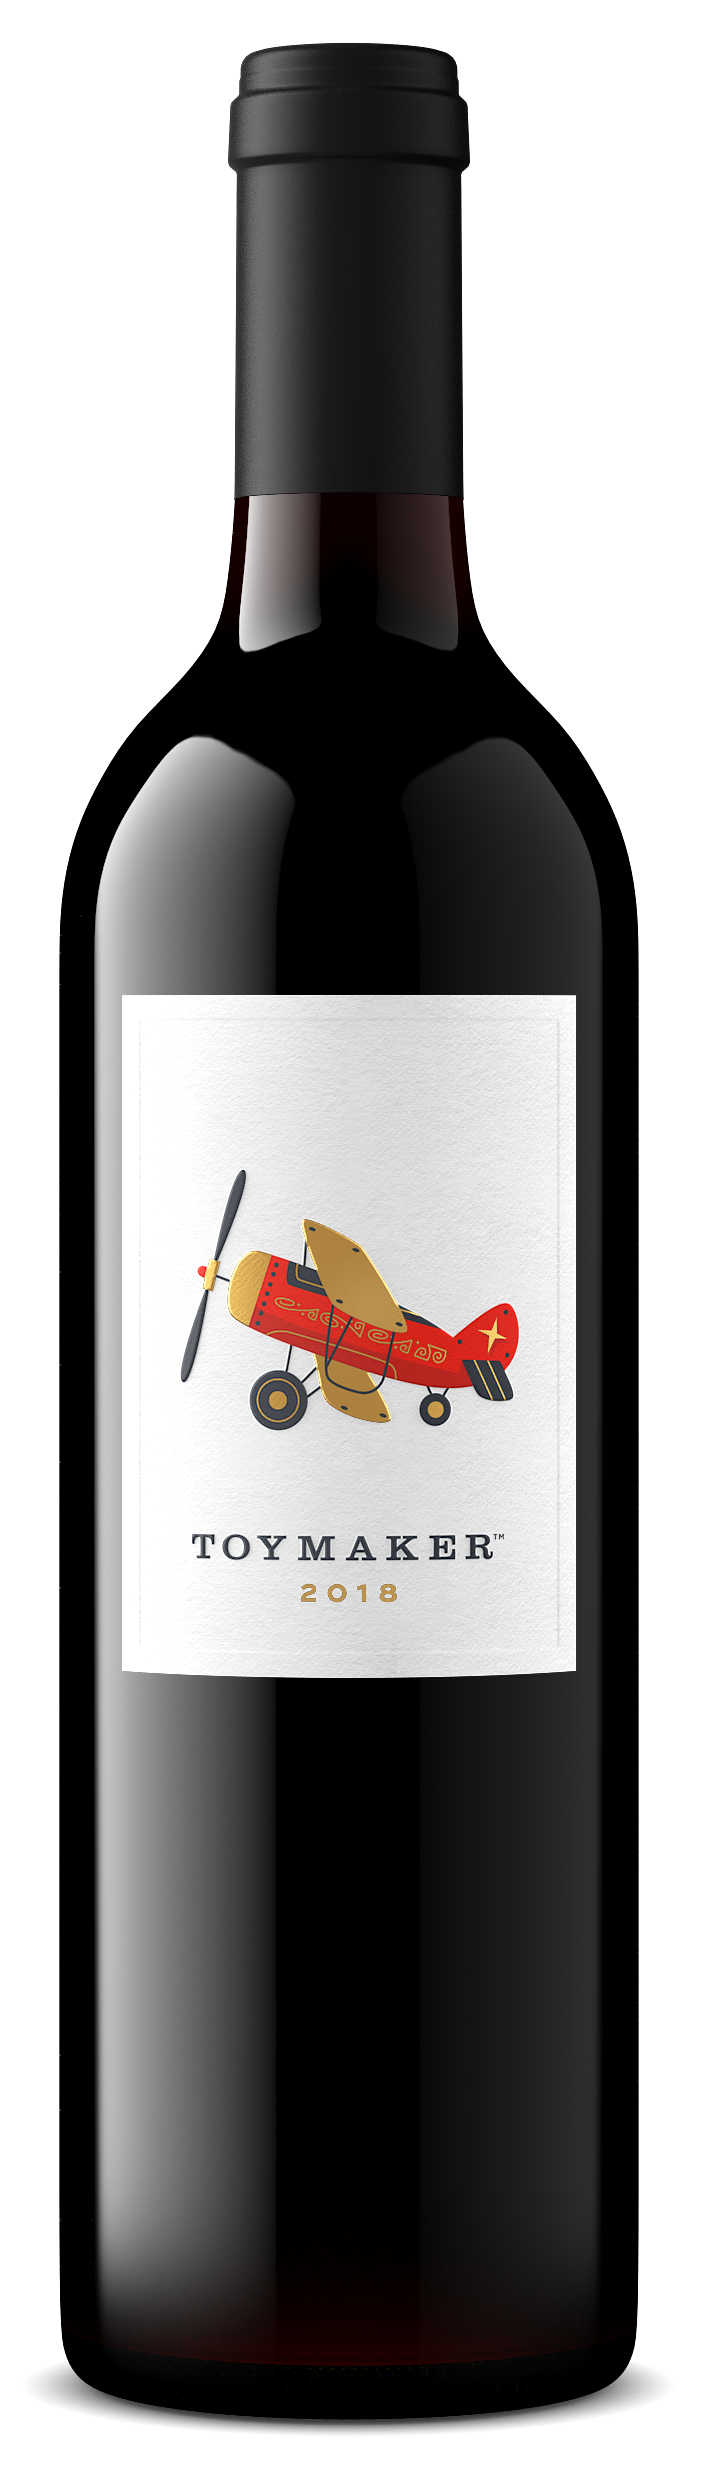 2017 ToyMaker Cellars Cabernet Sauvignon Napa Valley Red Wine Label with Toy Train label, made by Napa Valley winemaker Martha McClellan. Rare & limited Grand Cru Napa Valley Cabernet Sauvignon.